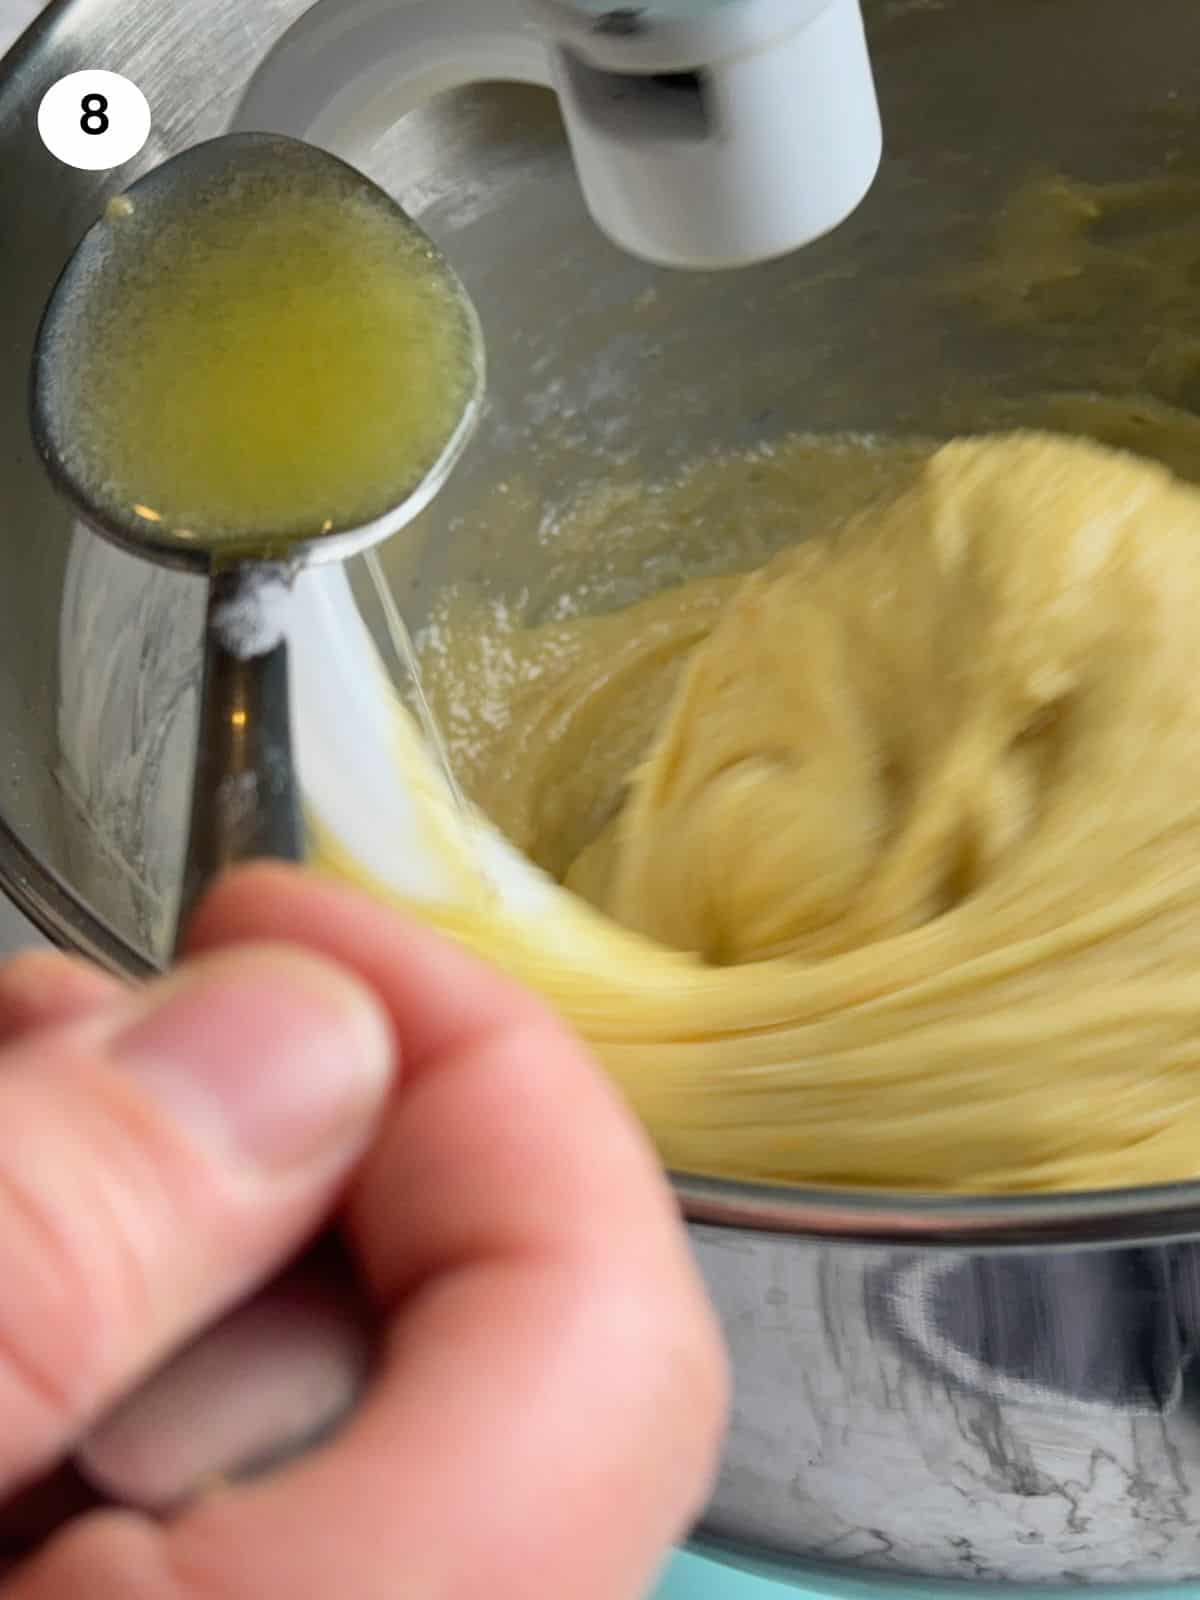 Adding the butter to the dough one spoon at a time.